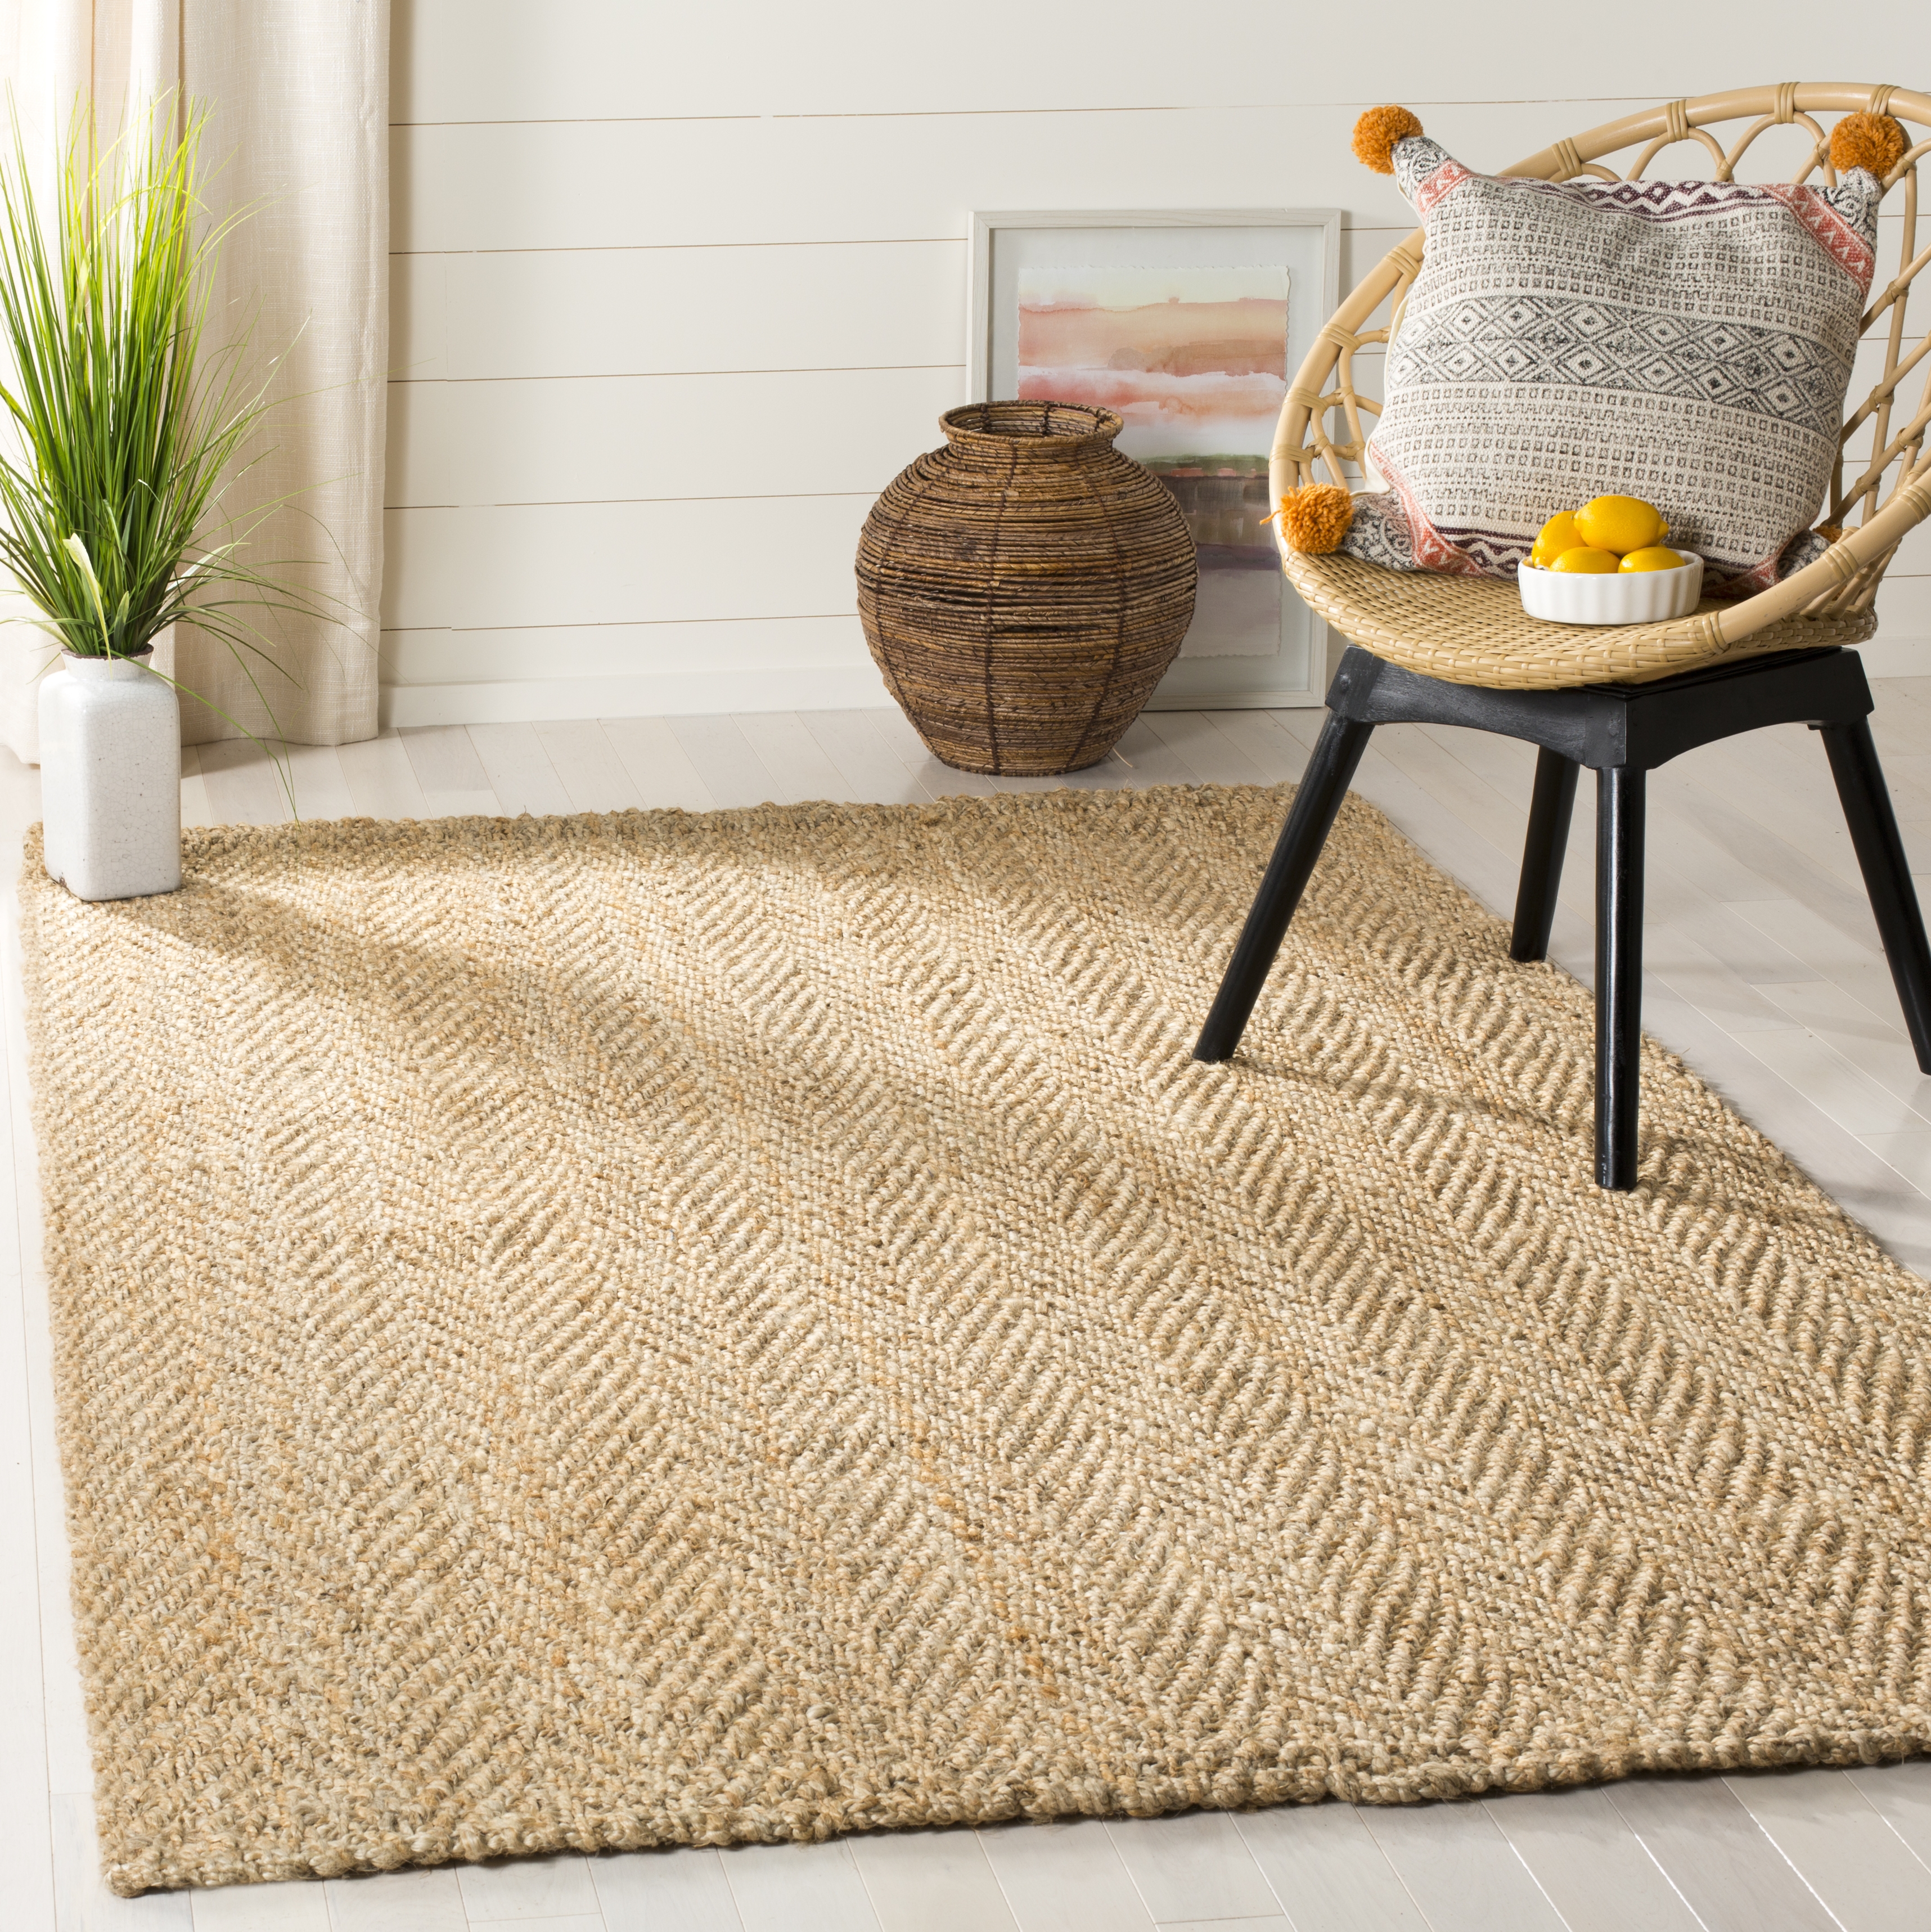 Arlo Home Hand Woven Area Rug, NF263A, Natural,  4' X 6' - Image 1